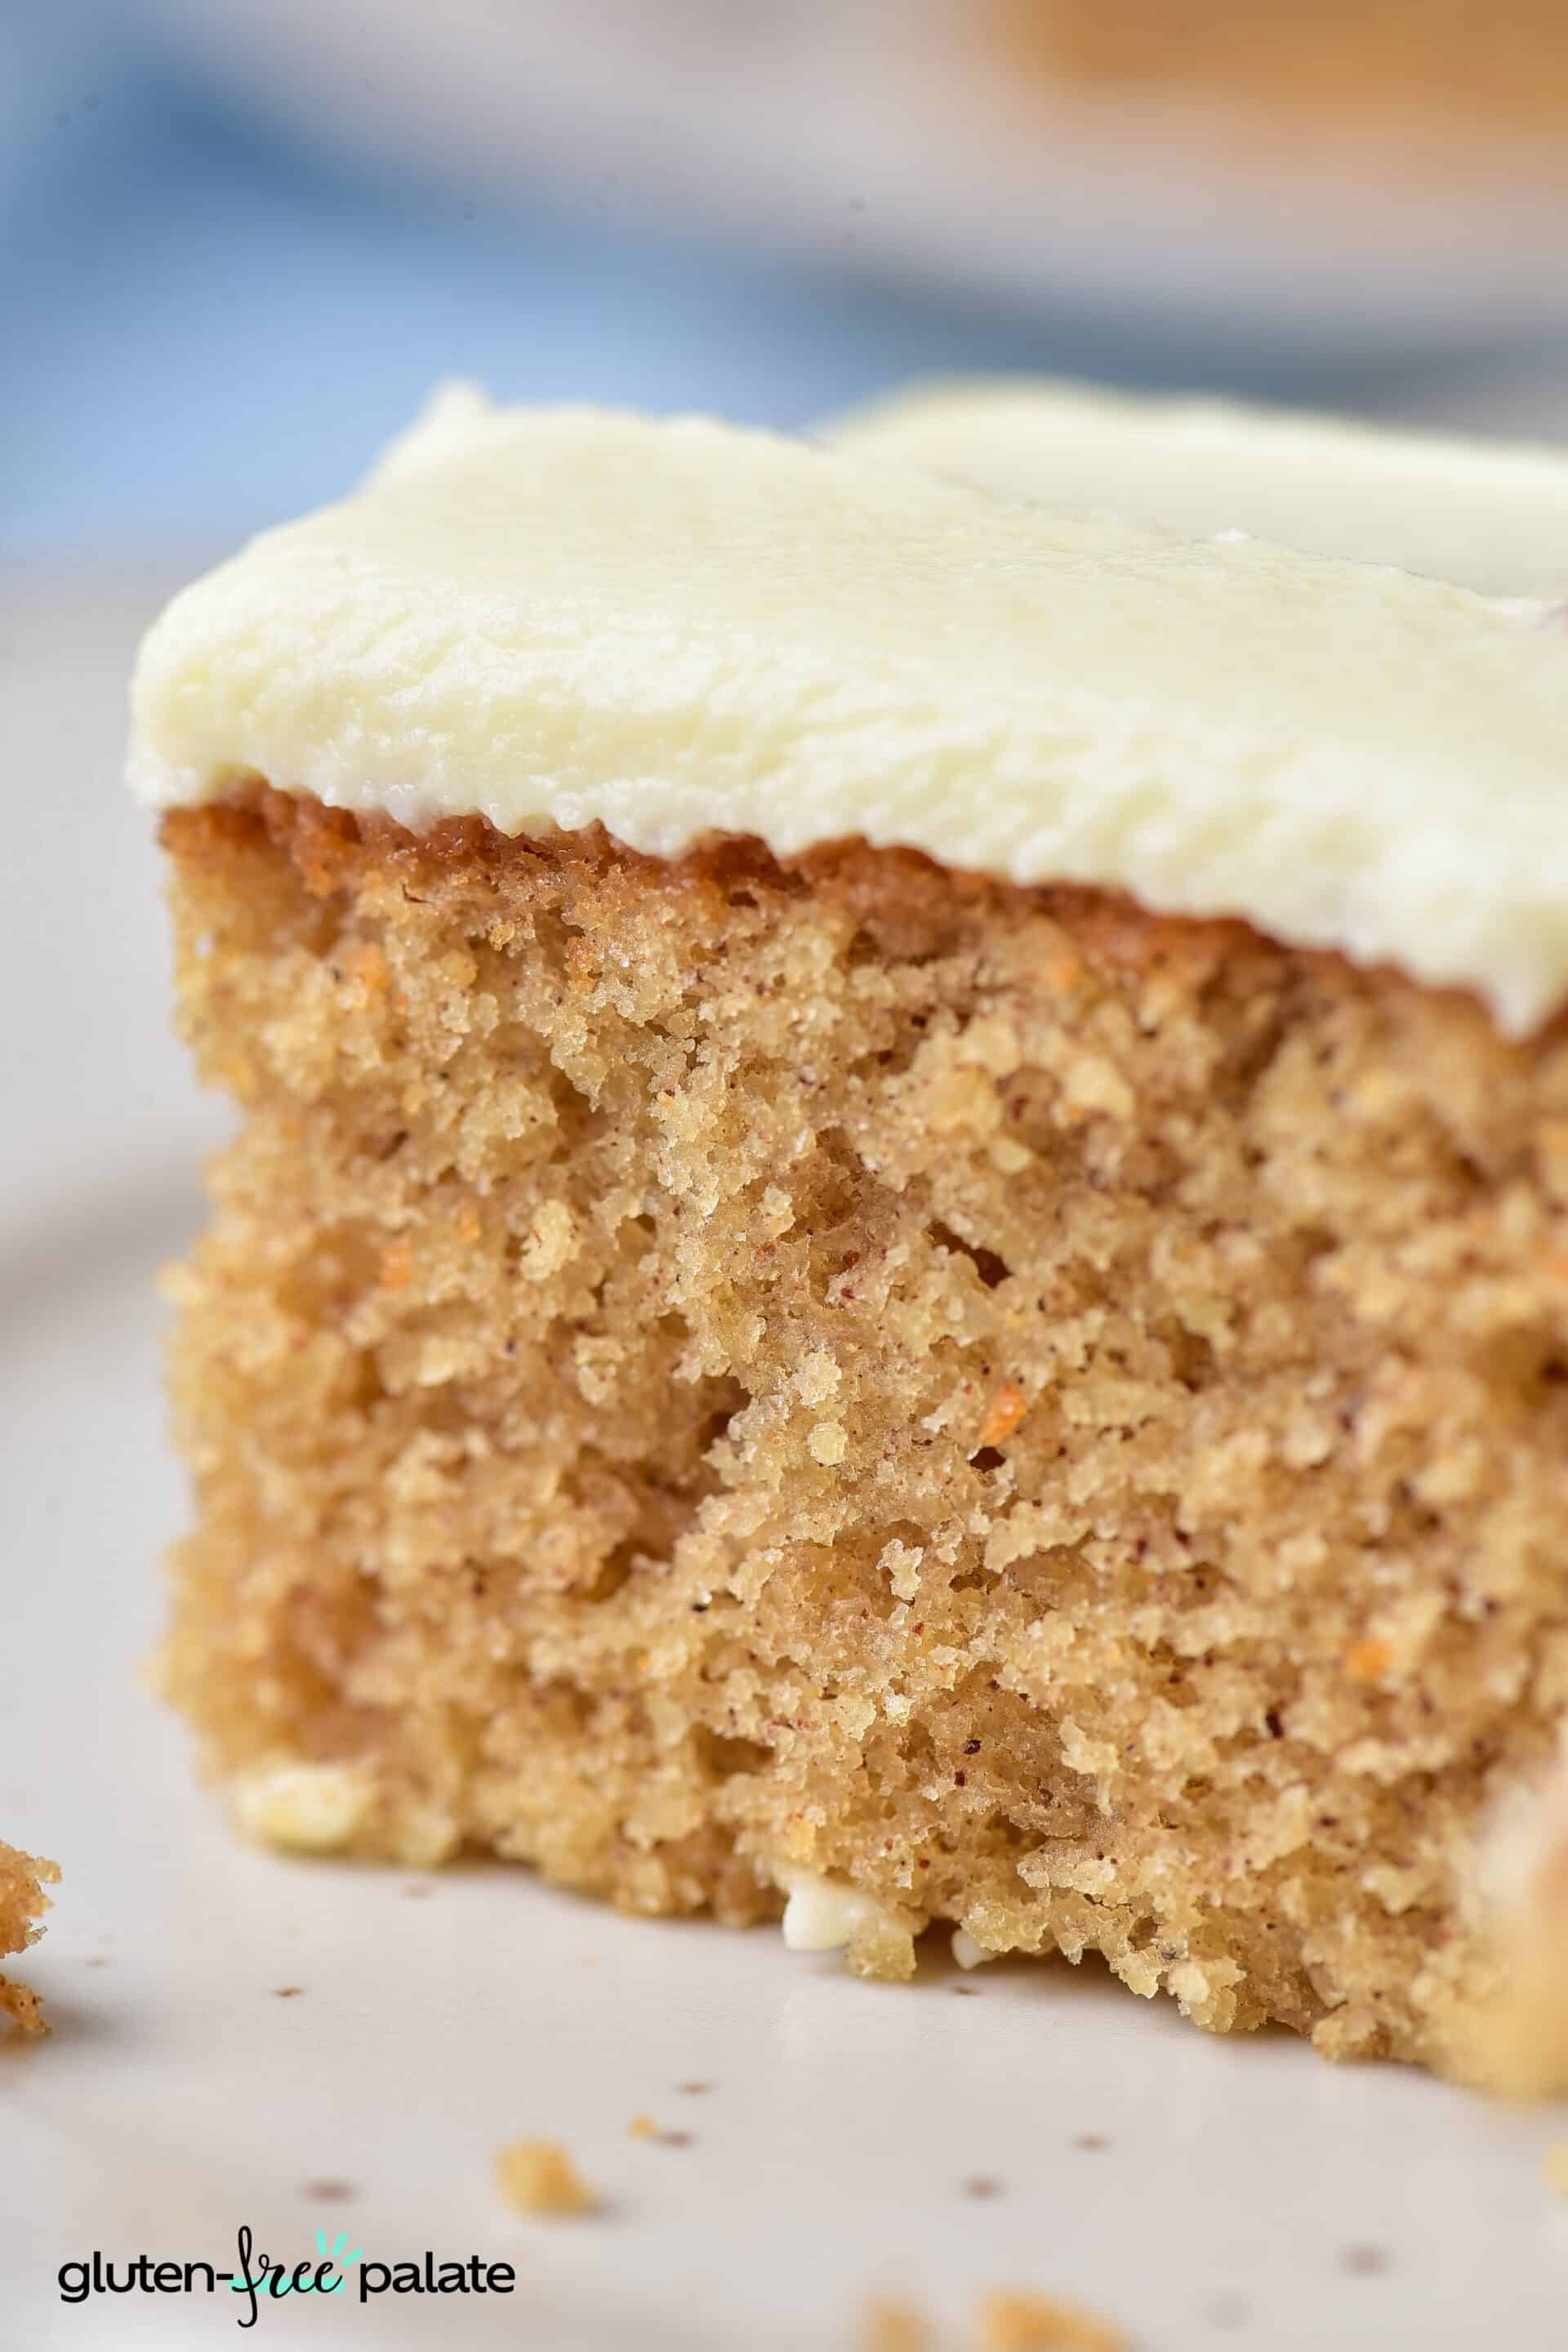 Close-up view of the Gluten-Free spice cake on a white plate showing the texture.